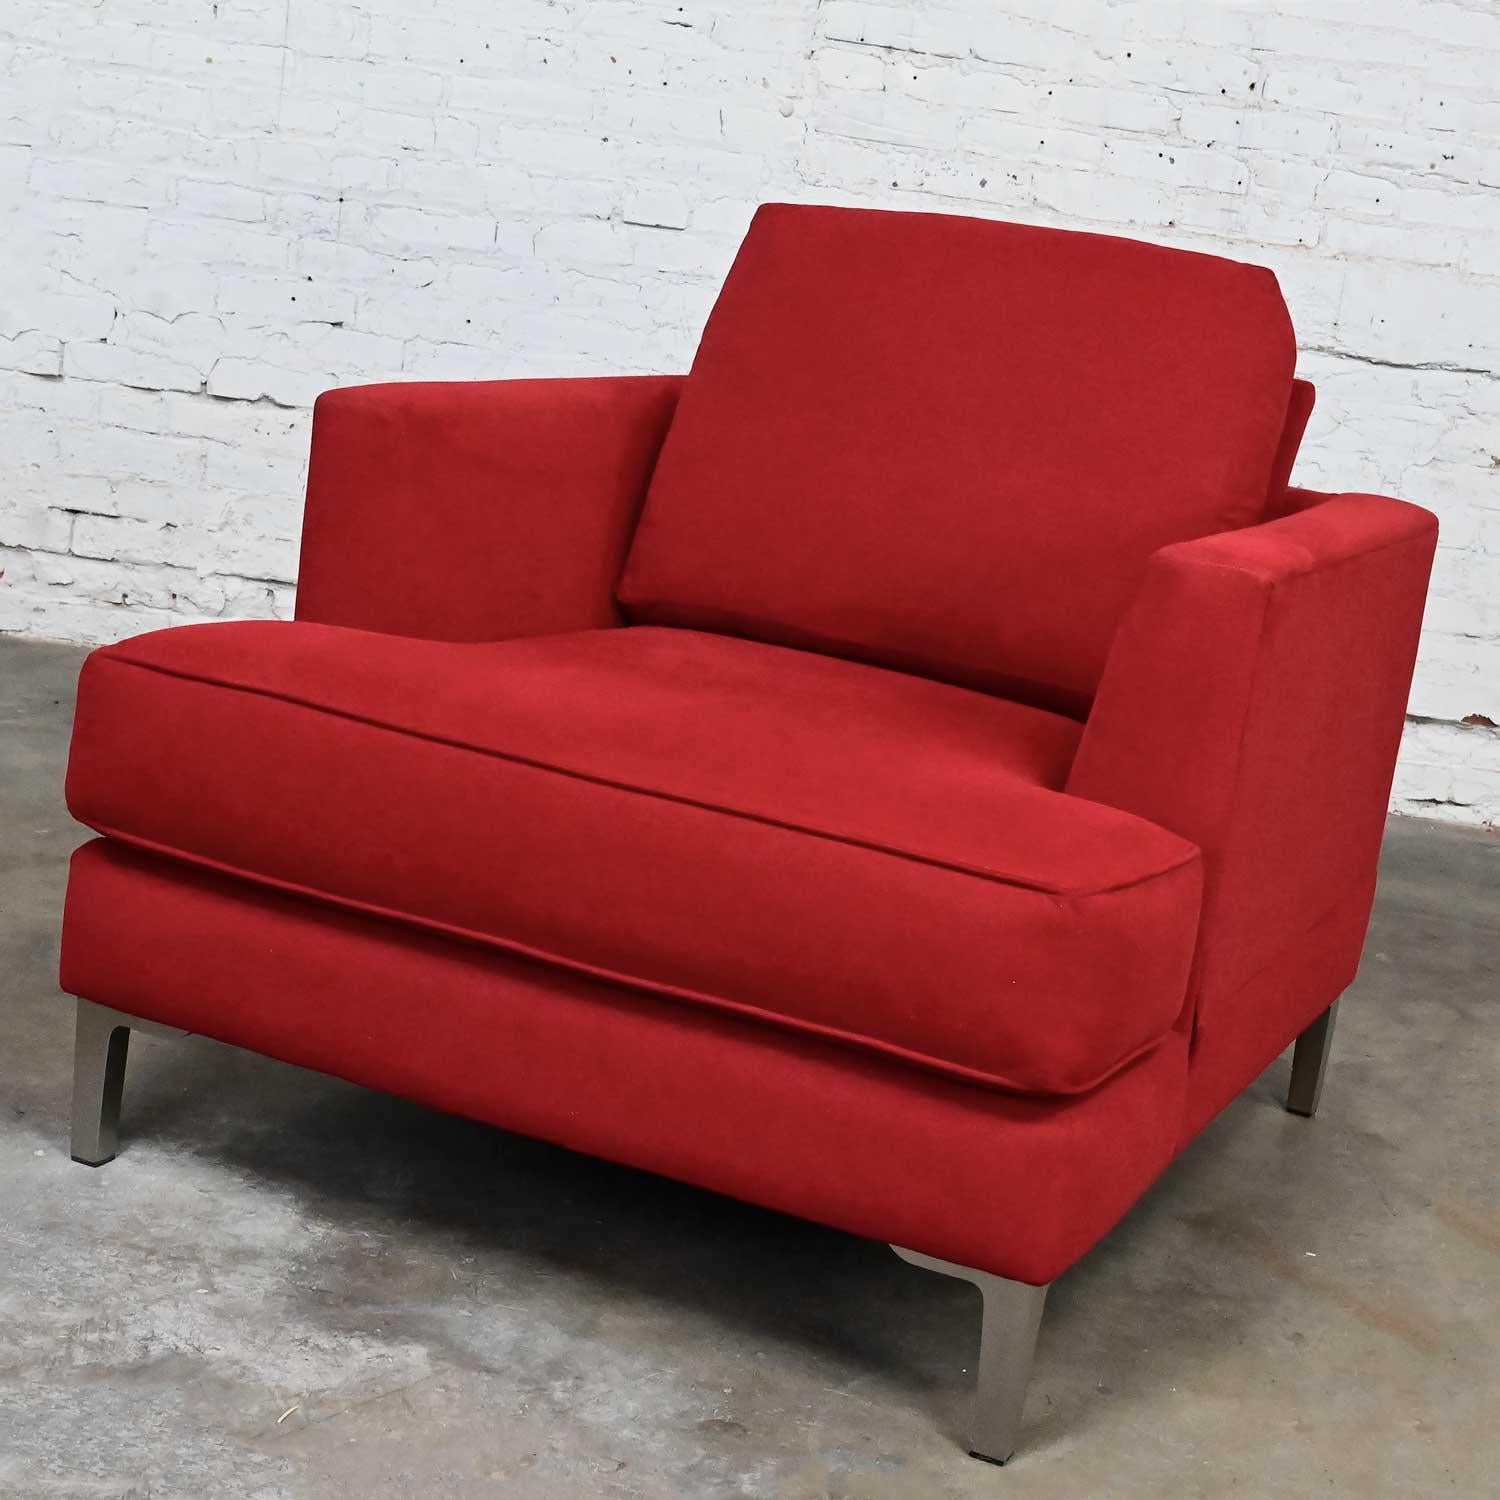 American Modern Carter Club Chair Attr Zen Collection Bright Red with Polished Steel Legs